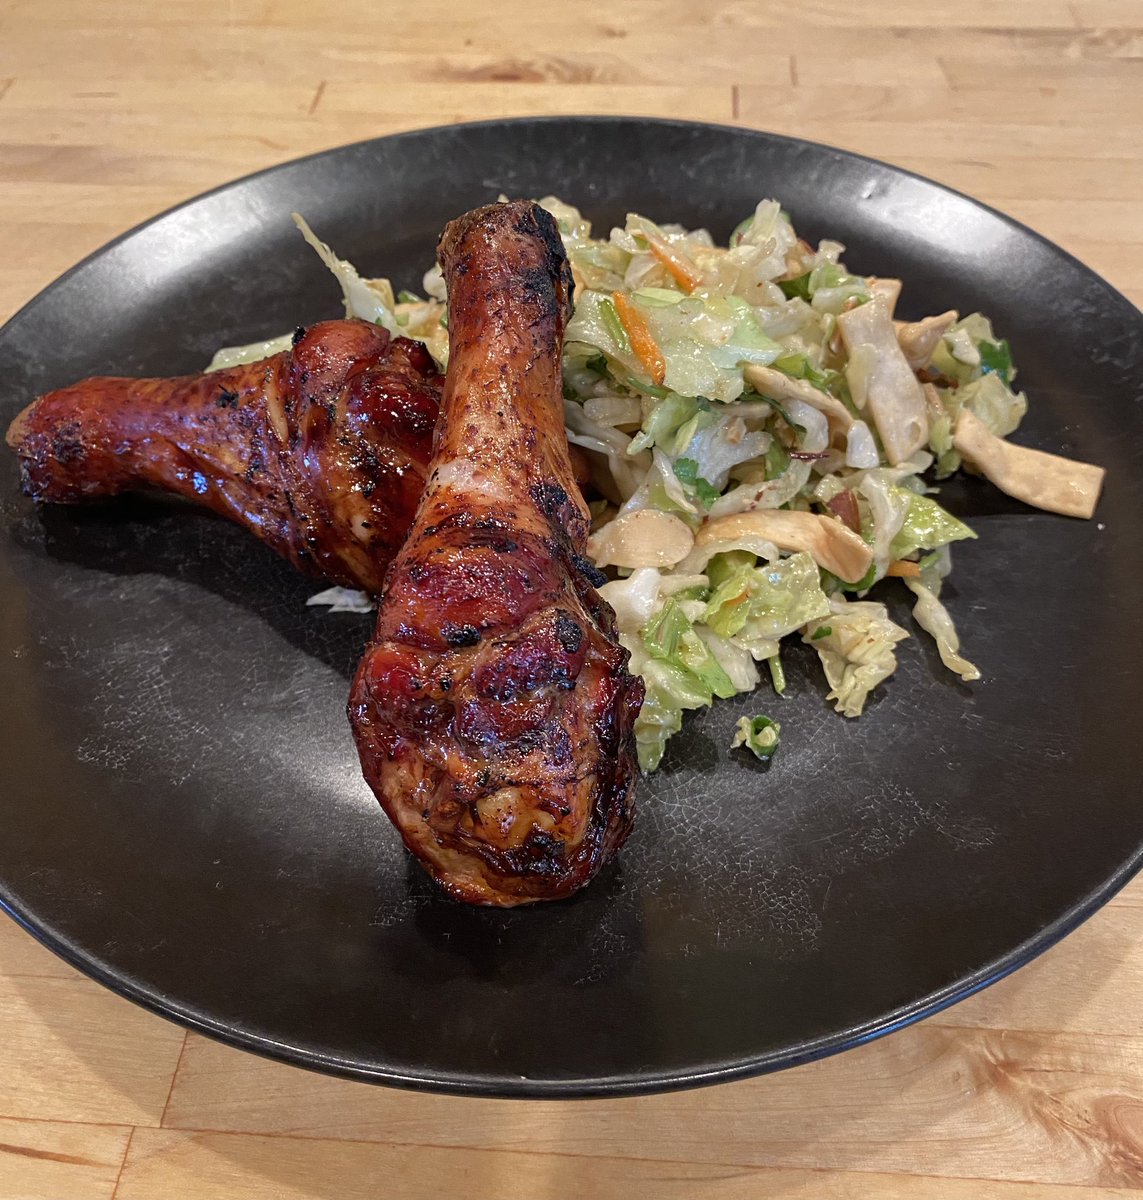 Maui chicken with Asian salad. Why drumsticks? Because they were on sale for an amazing price. #yegfood